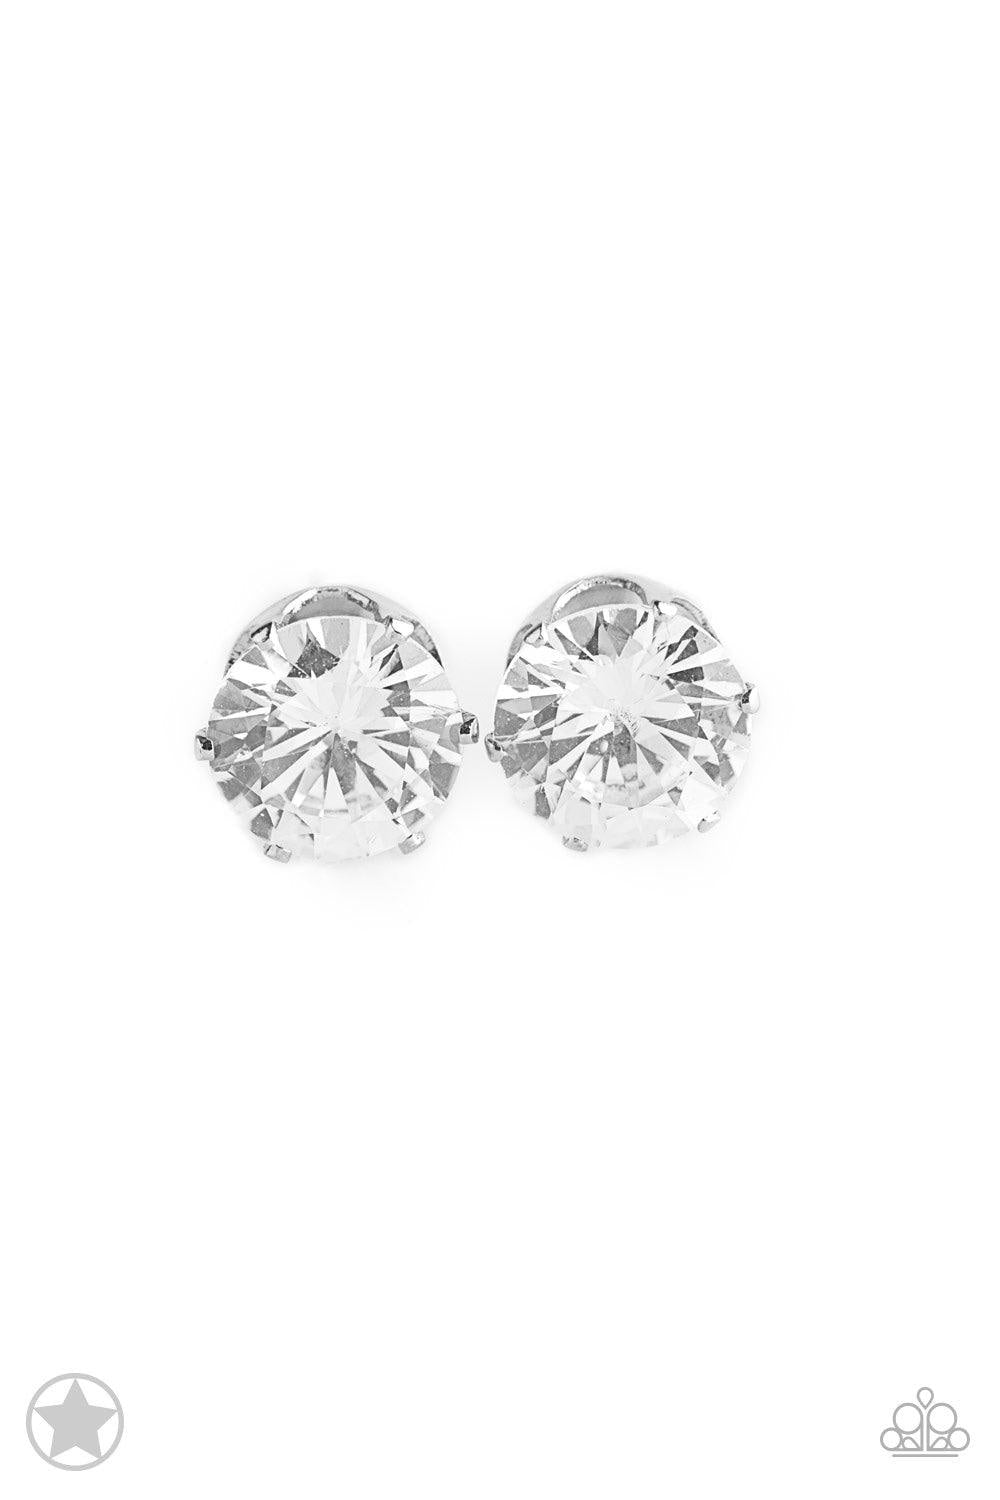 Paparazzi Accessories Just In TIMELESS - White A sparkling white rhinestone is nestled inside a classic silver frame for a timeless look. Earring attaches to a standard post fitting. Jewelry